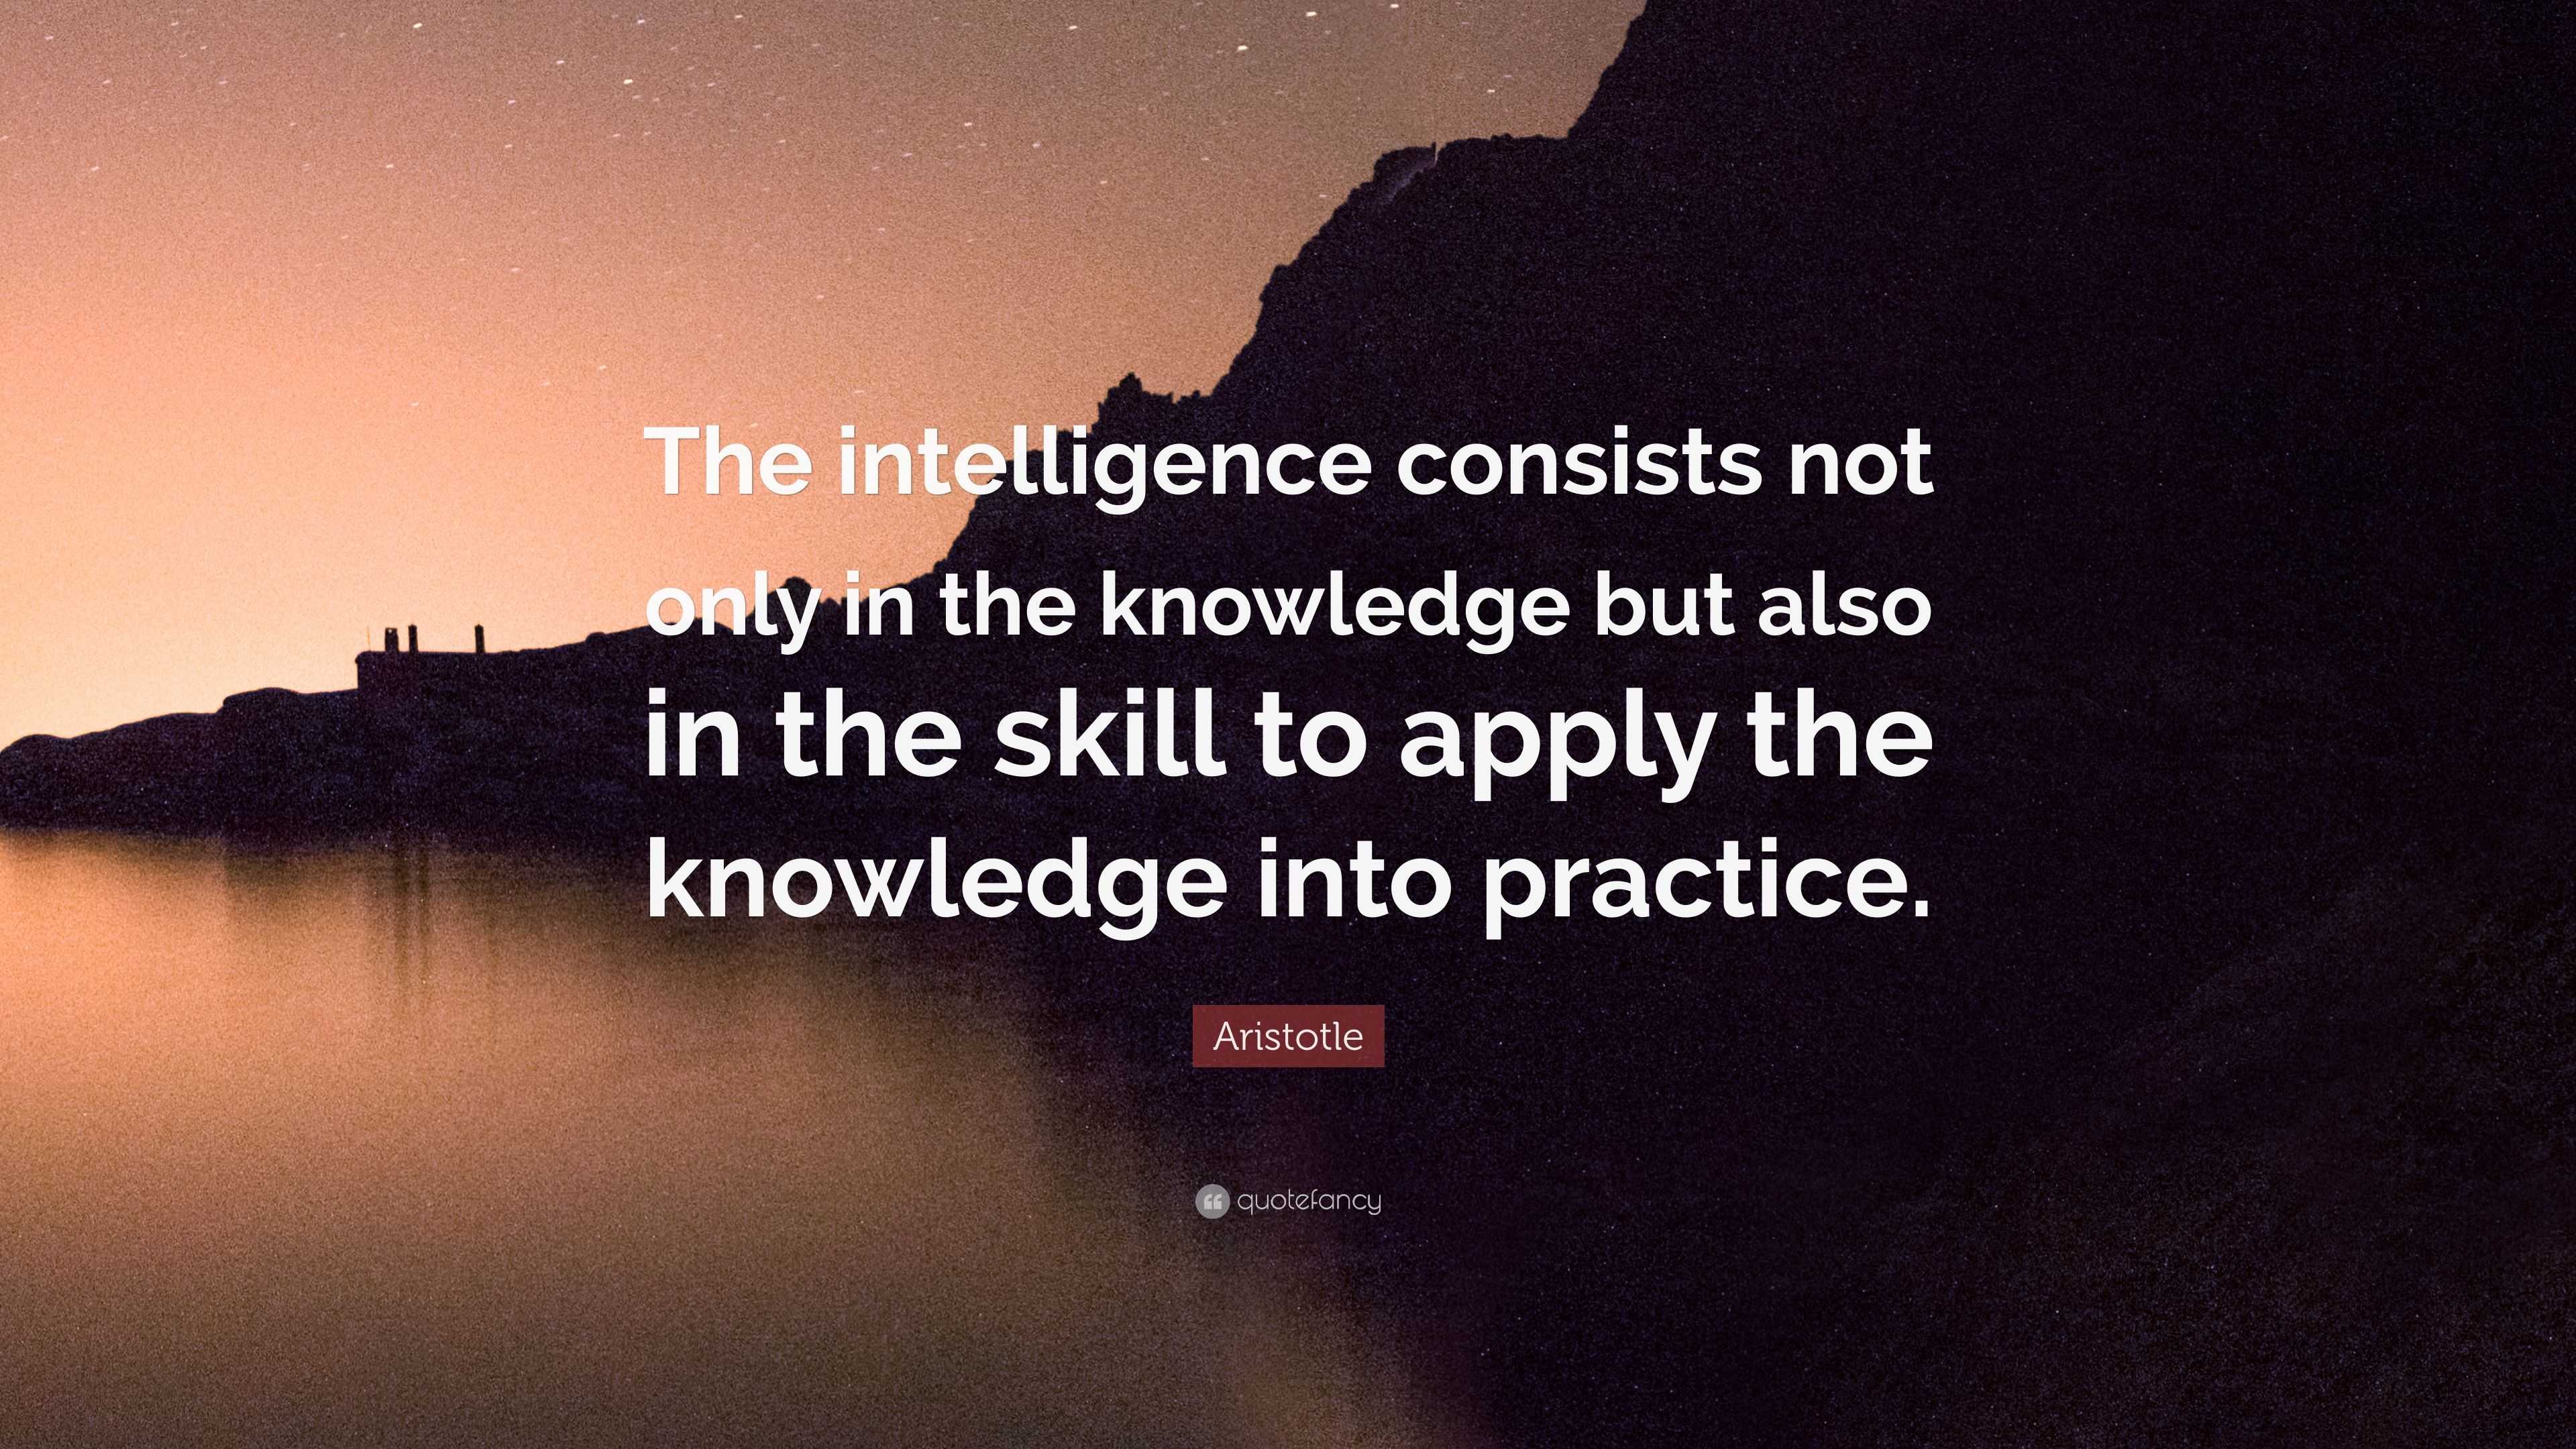 Aristotle Quote “The intelligence consists not only in the knowledge but also in the